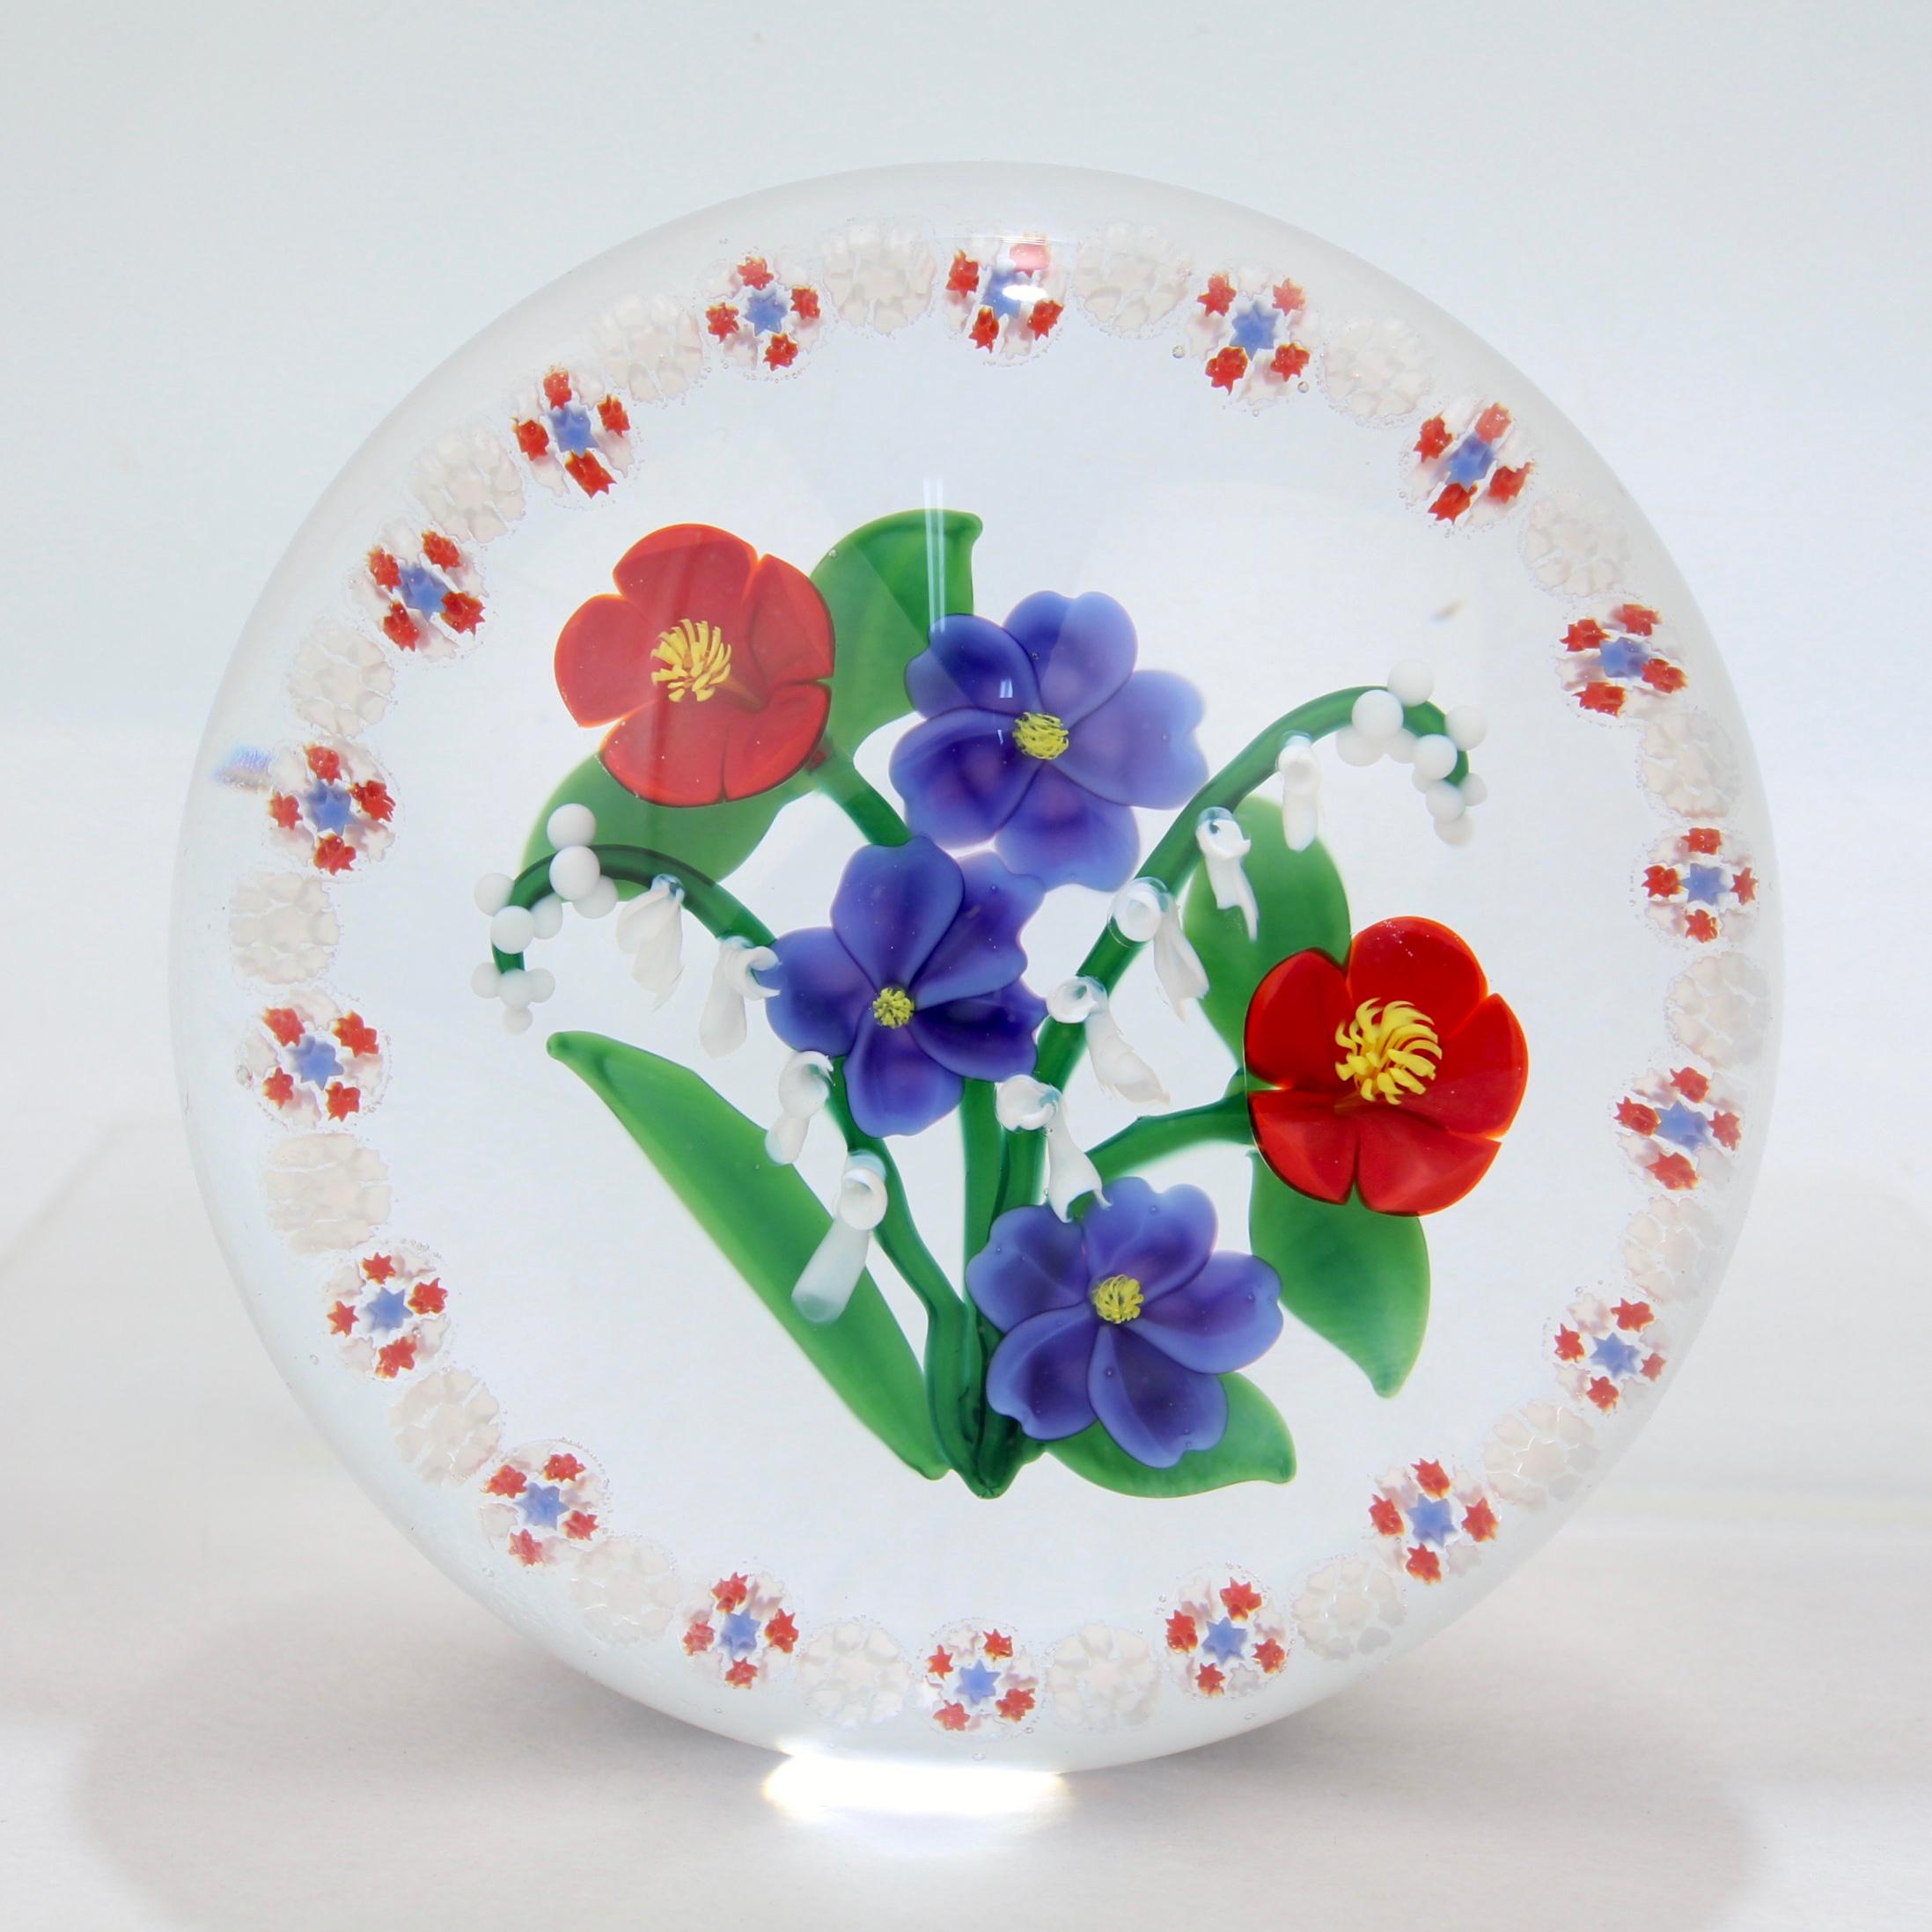 A fine, signed lampwork paperweight by Randall Grubb.

With a flat floral bouquet surrounded by a millefiori ring or garland.

With a G signature cane at the base of the flowers. 

Signed with an etched signature to the side: Randall Grubb